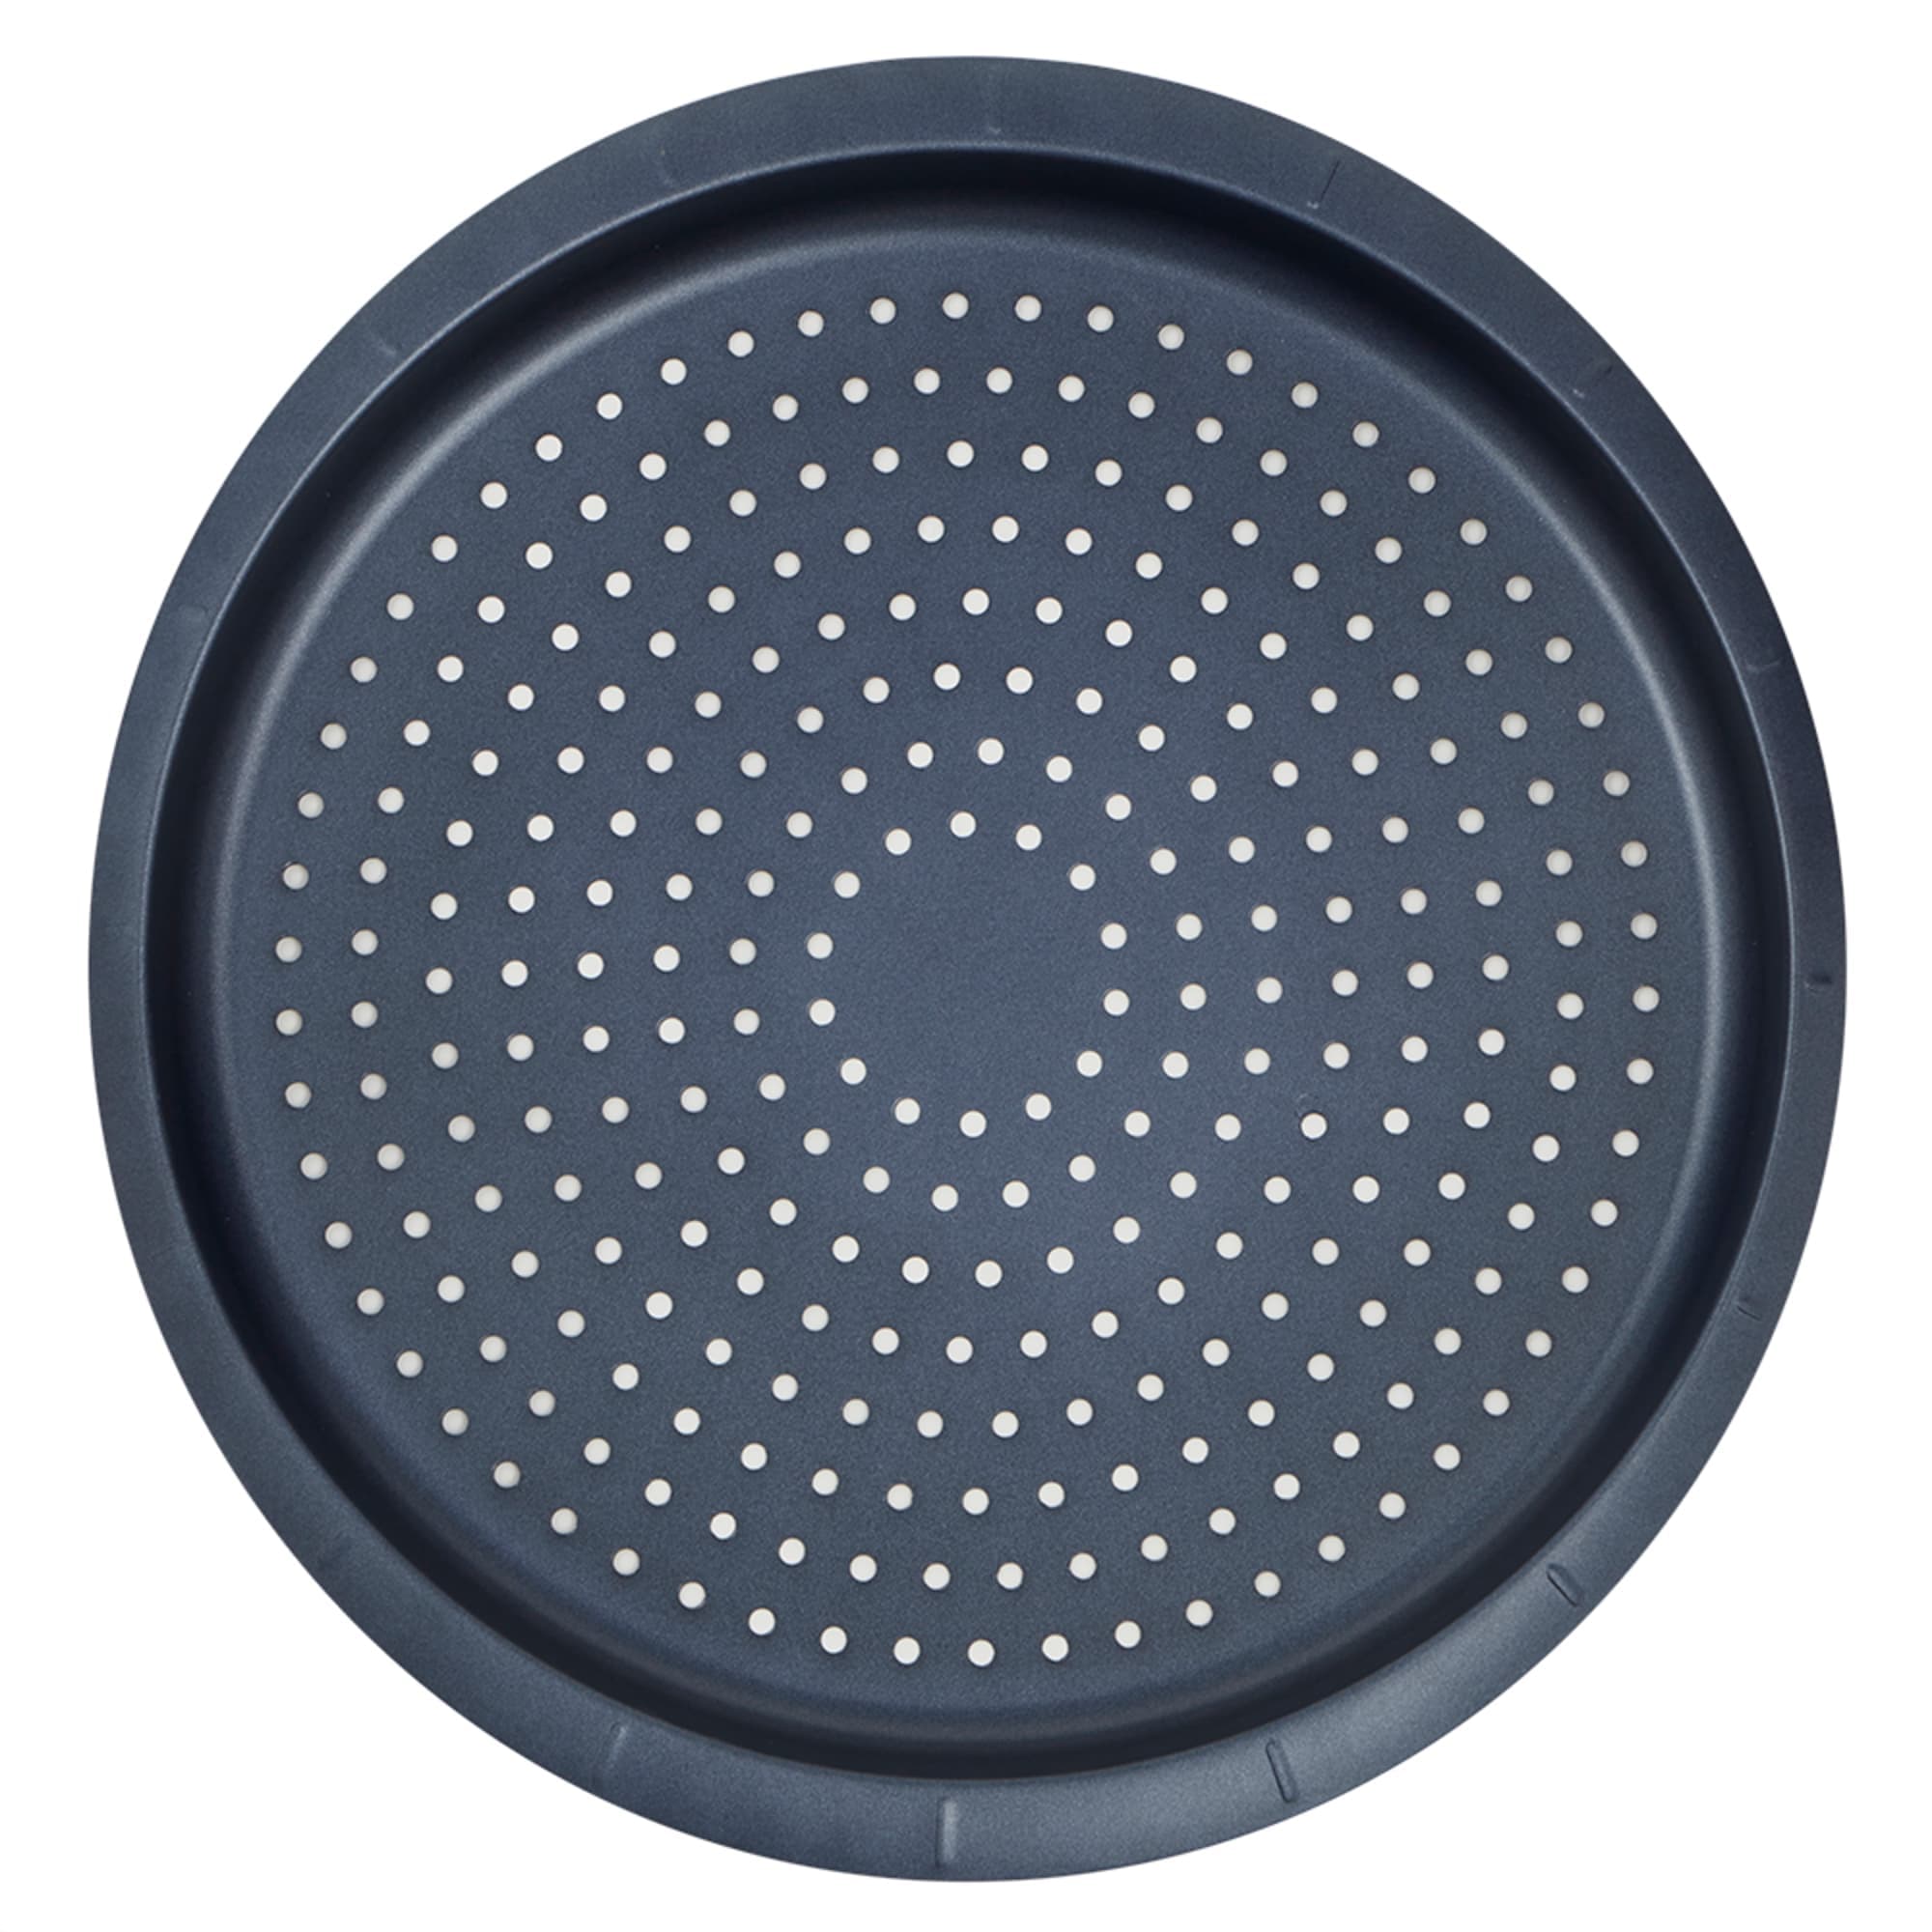 Michael Graves Design Non-Stick Perforated Carbon Steel Pizza Pan, Indigo $7.00 EACH, CASE PACK OF 12